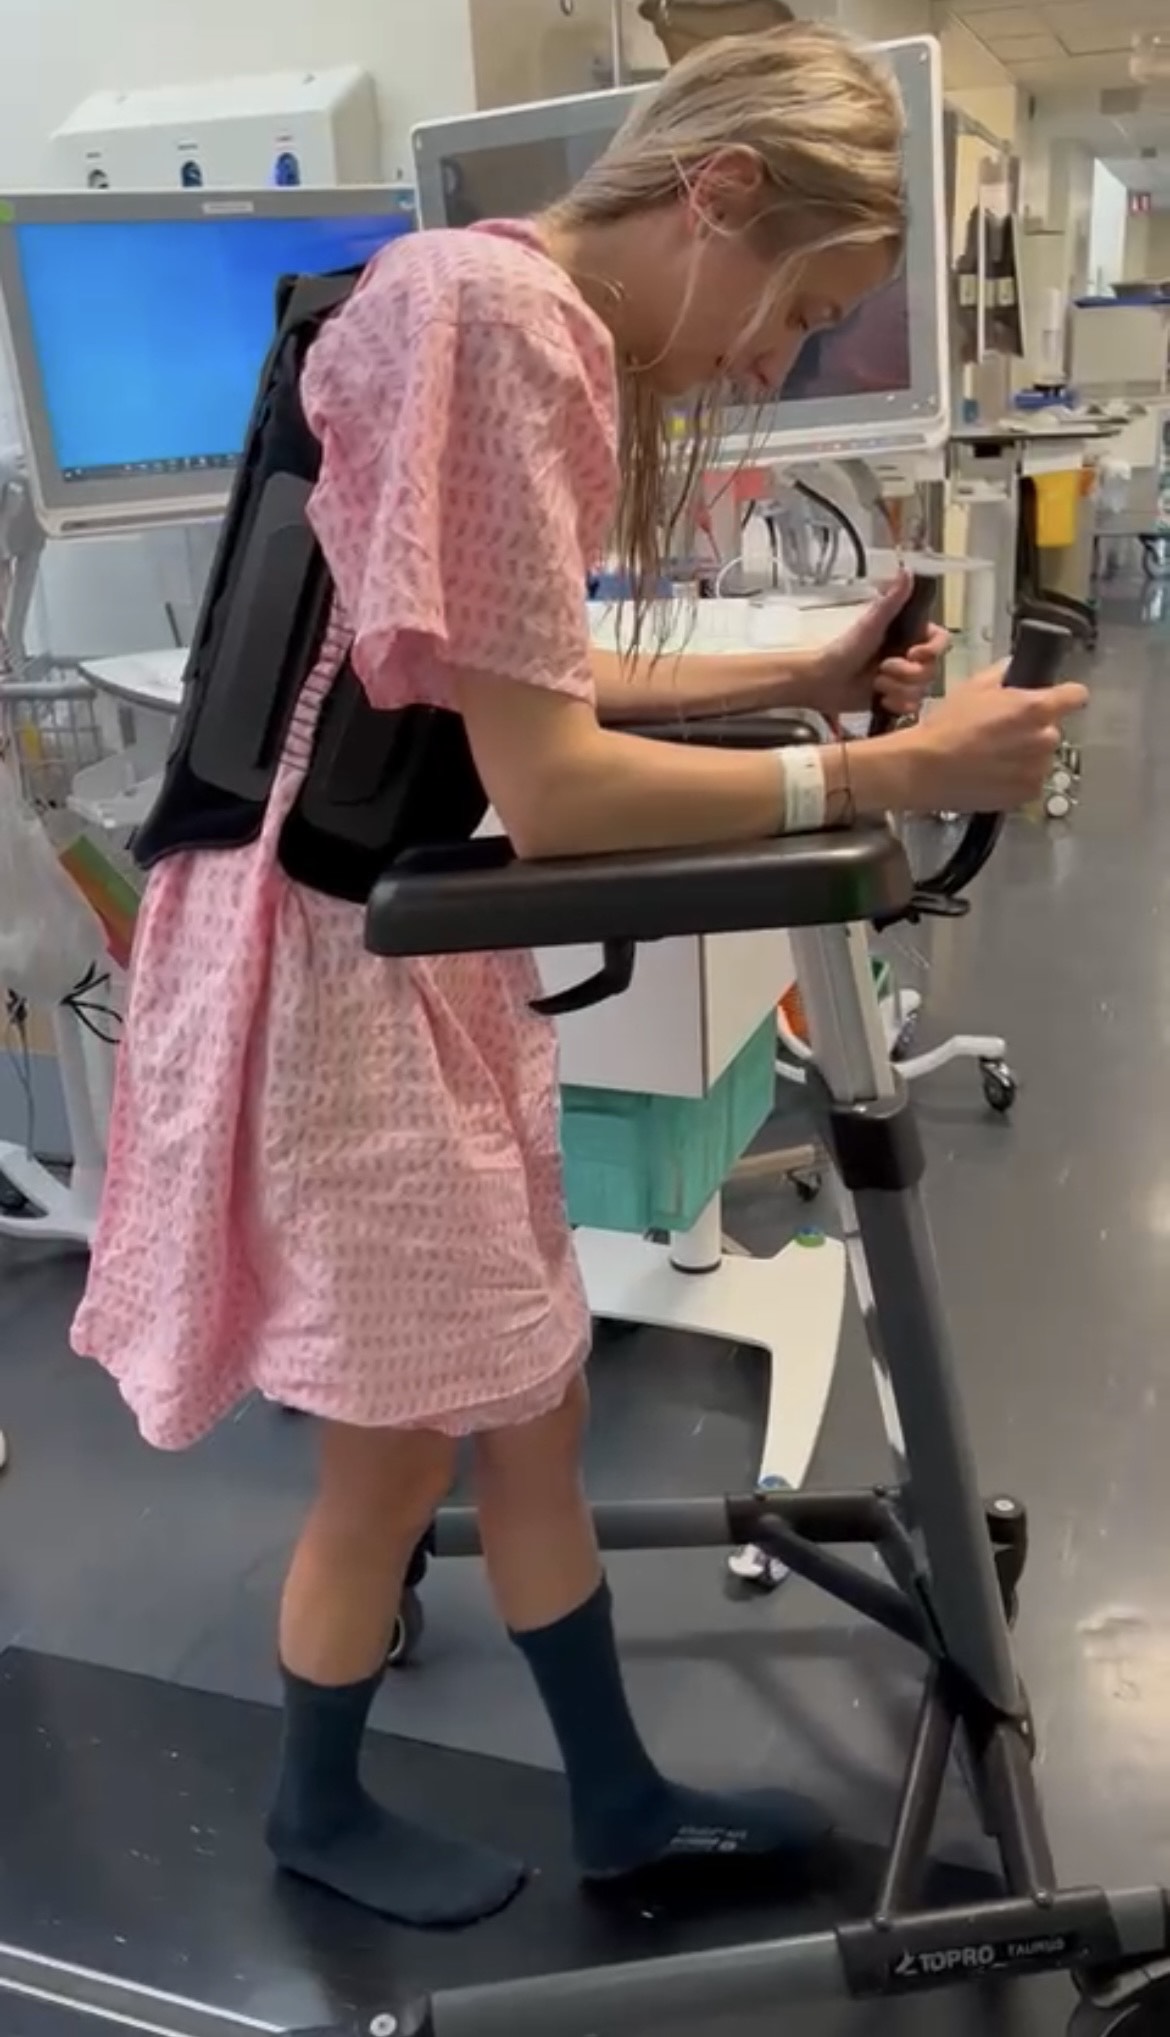 1 Kynleigh learning to walk again after braking her back